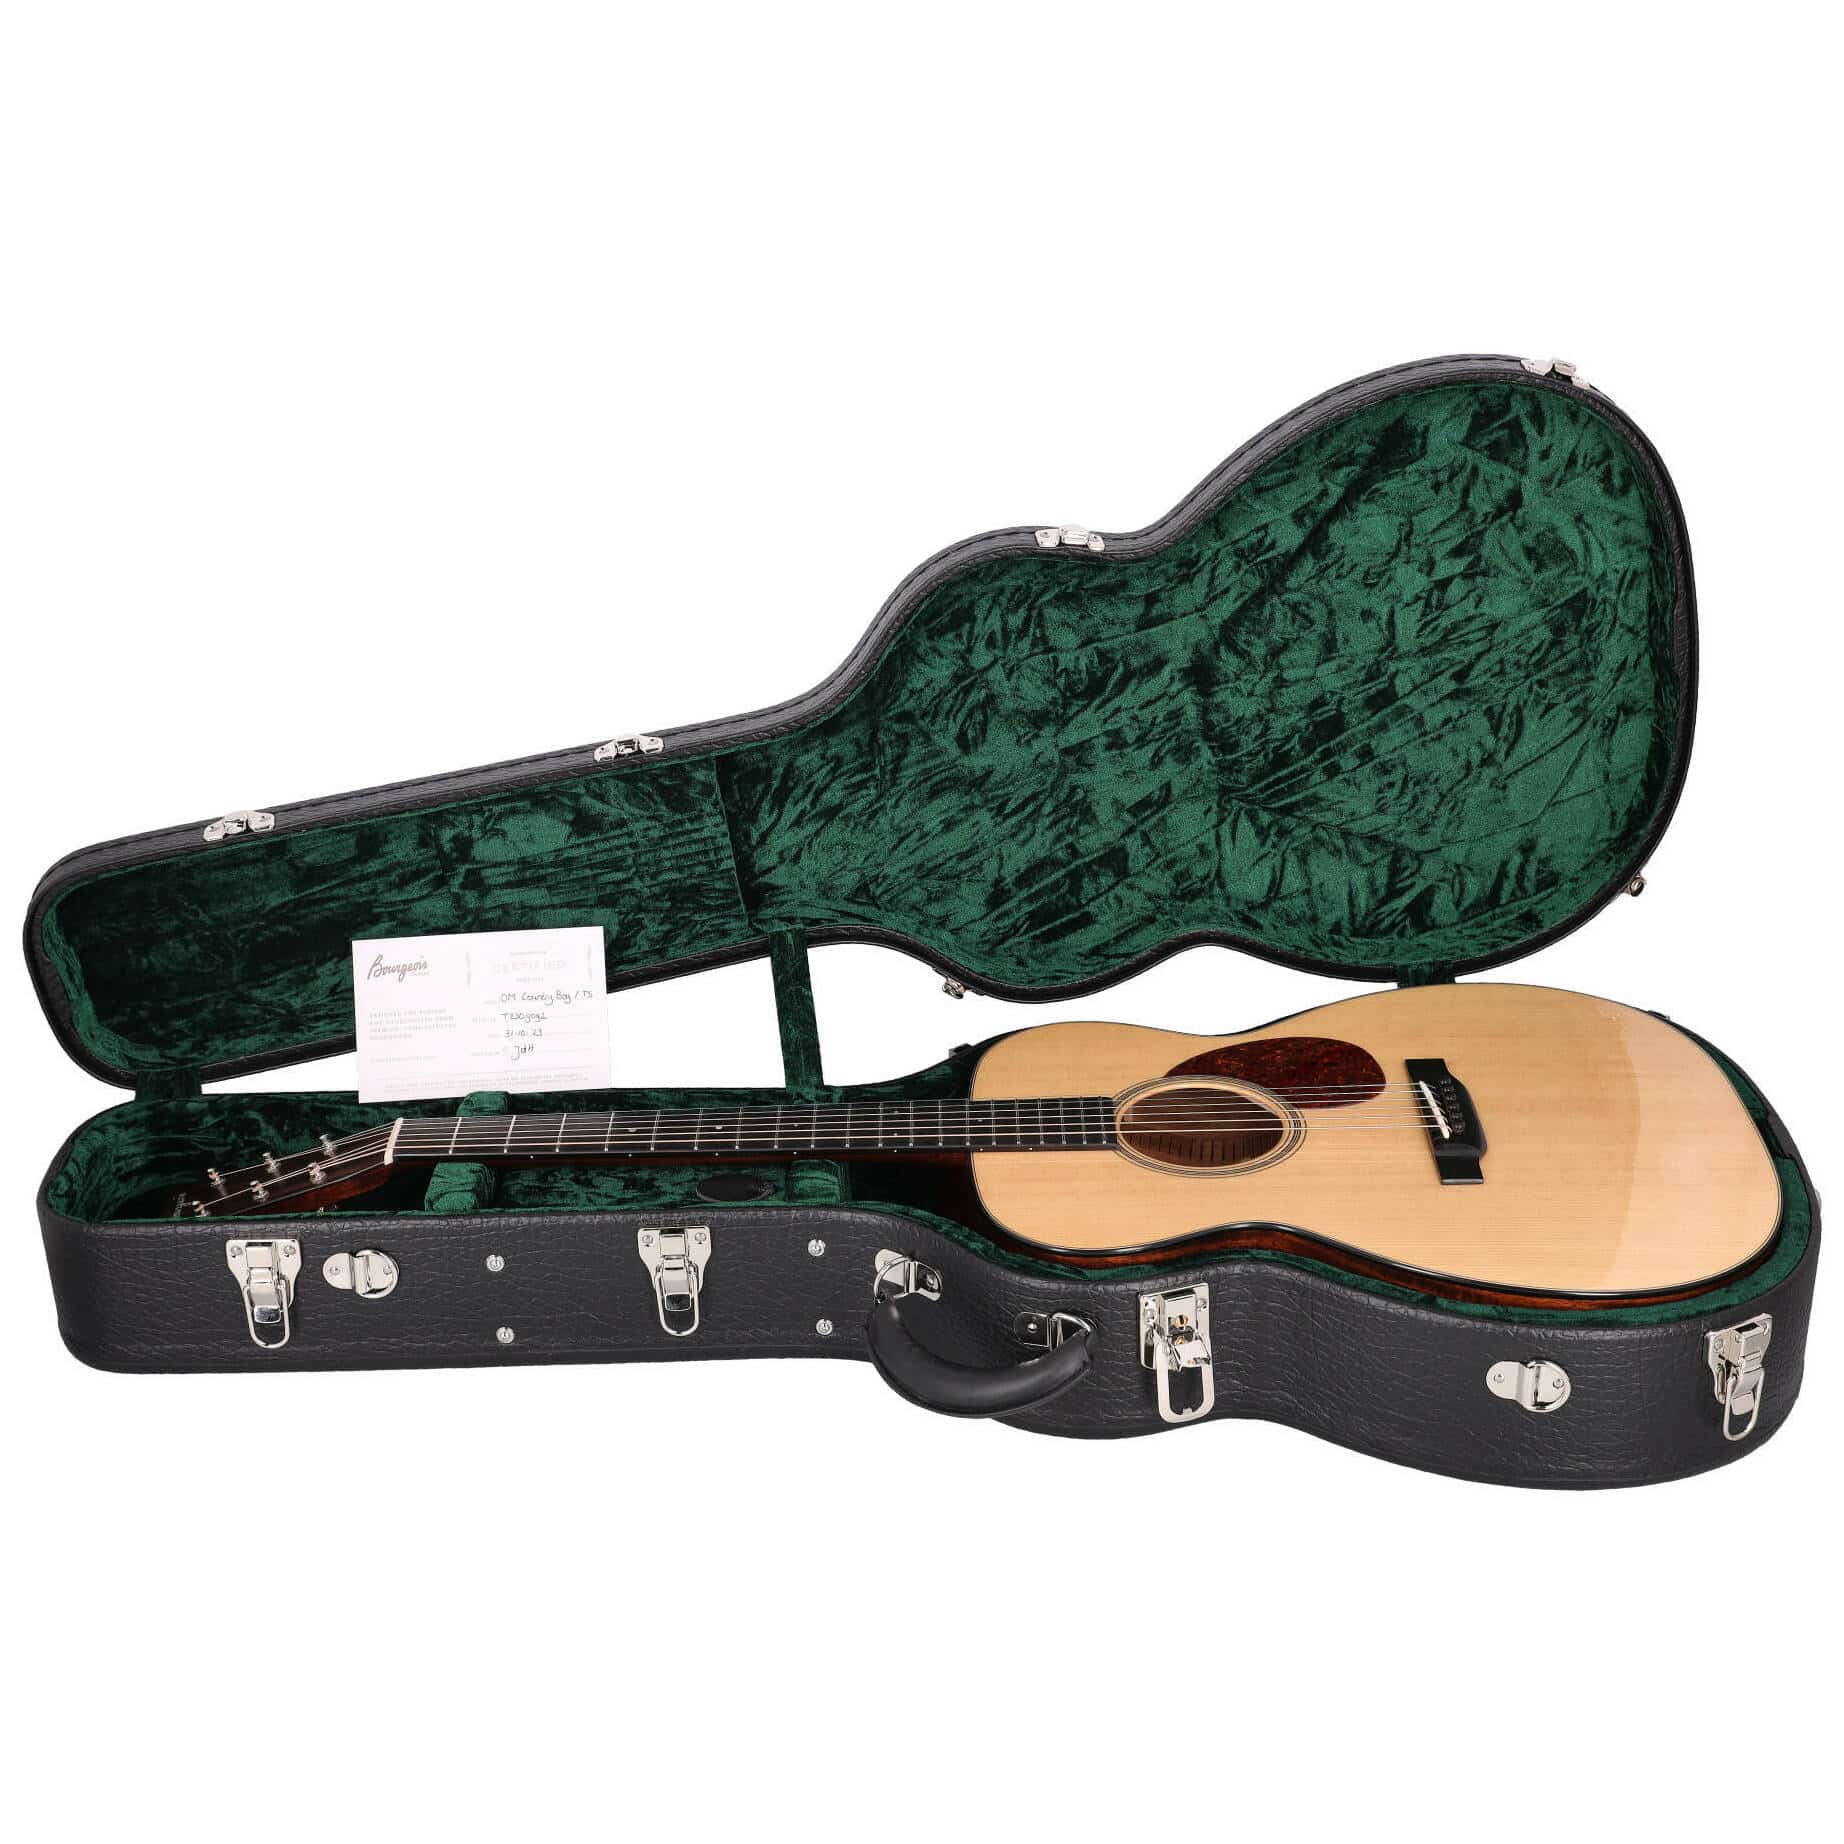 Bourgeois Guitars OM CountryBoy Touchstone 16